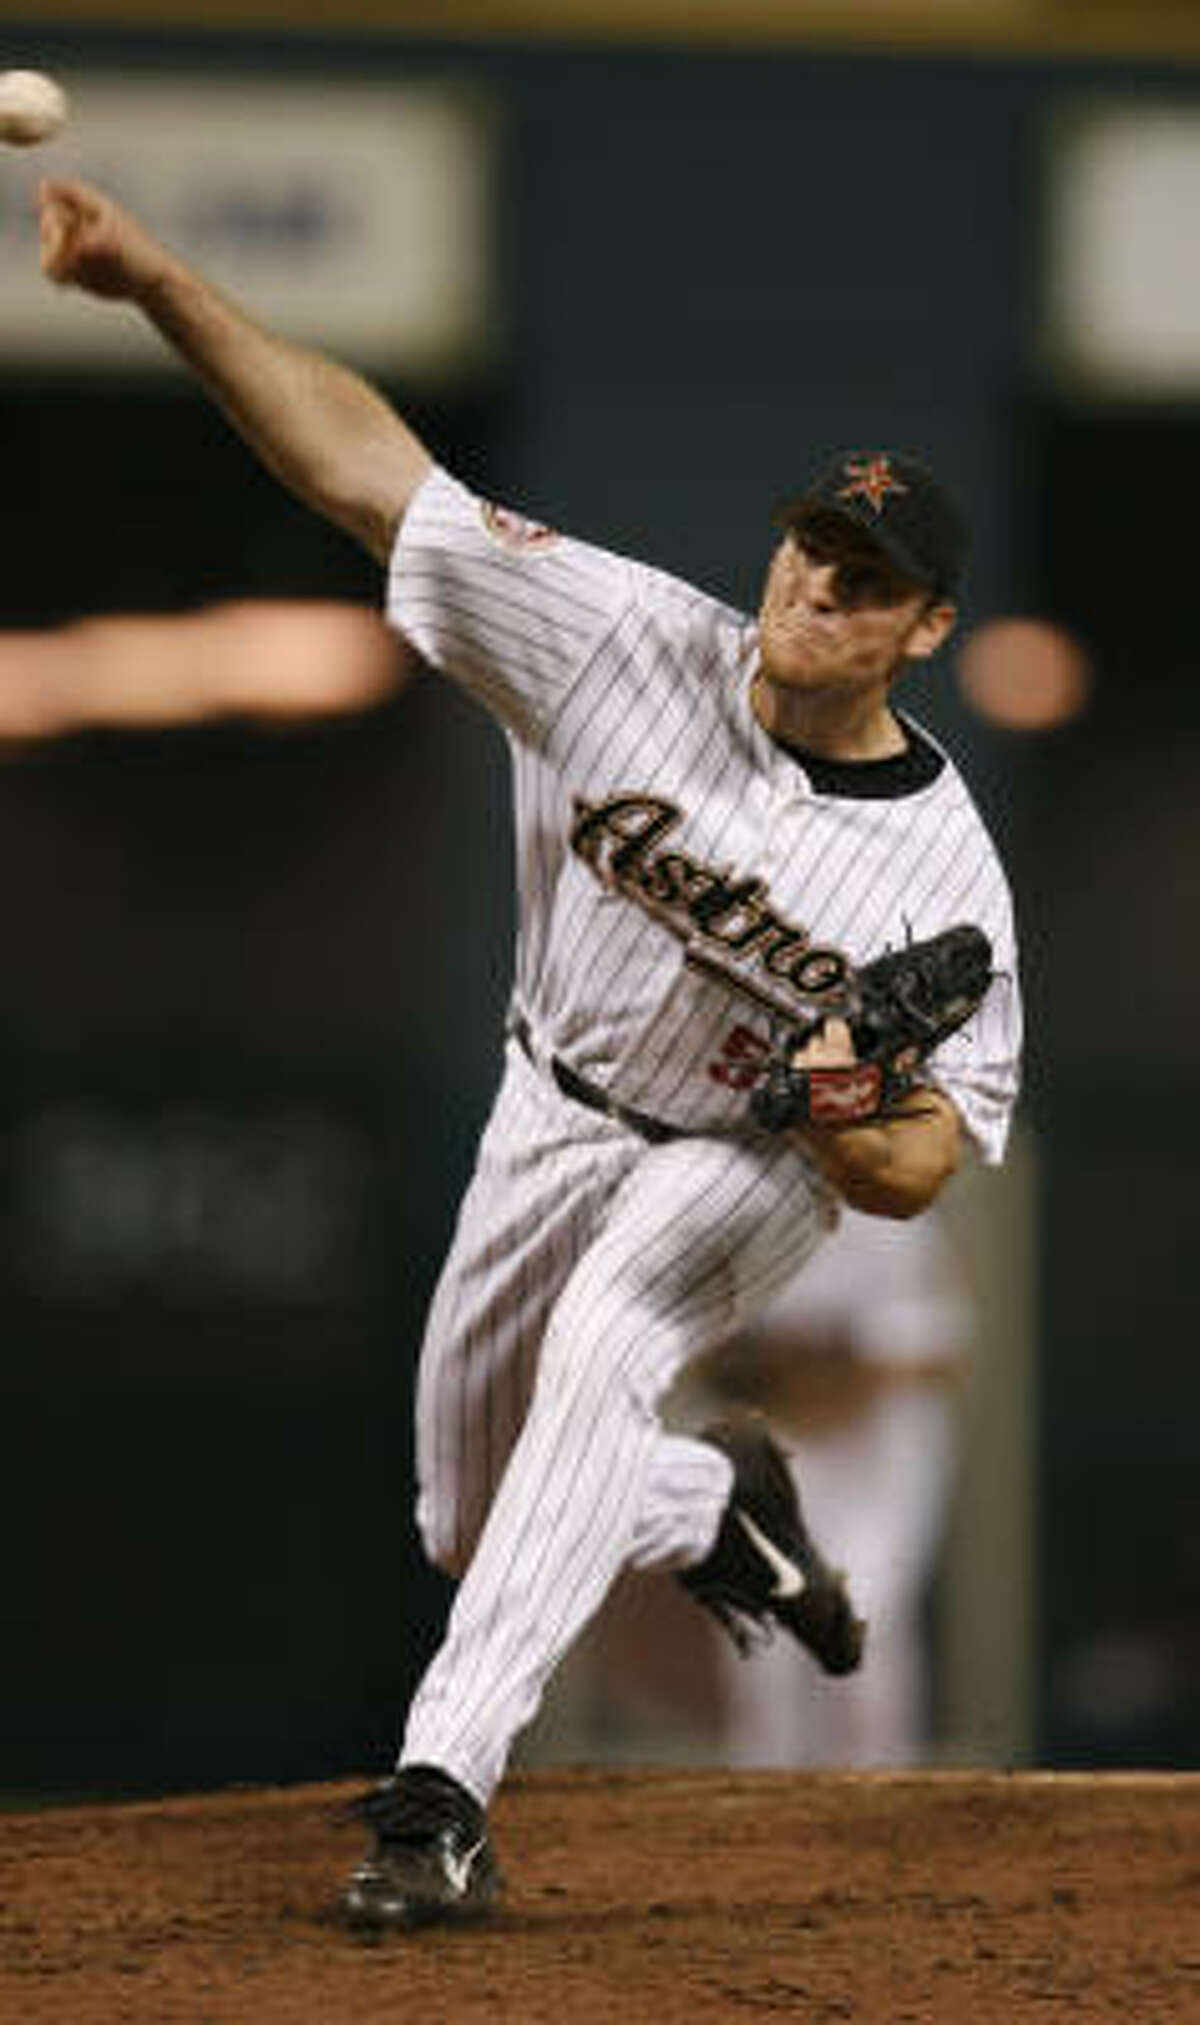 Brad Lidge had his ups and downs in 2006 for the Astros and looks for a more even outcome in 2007.